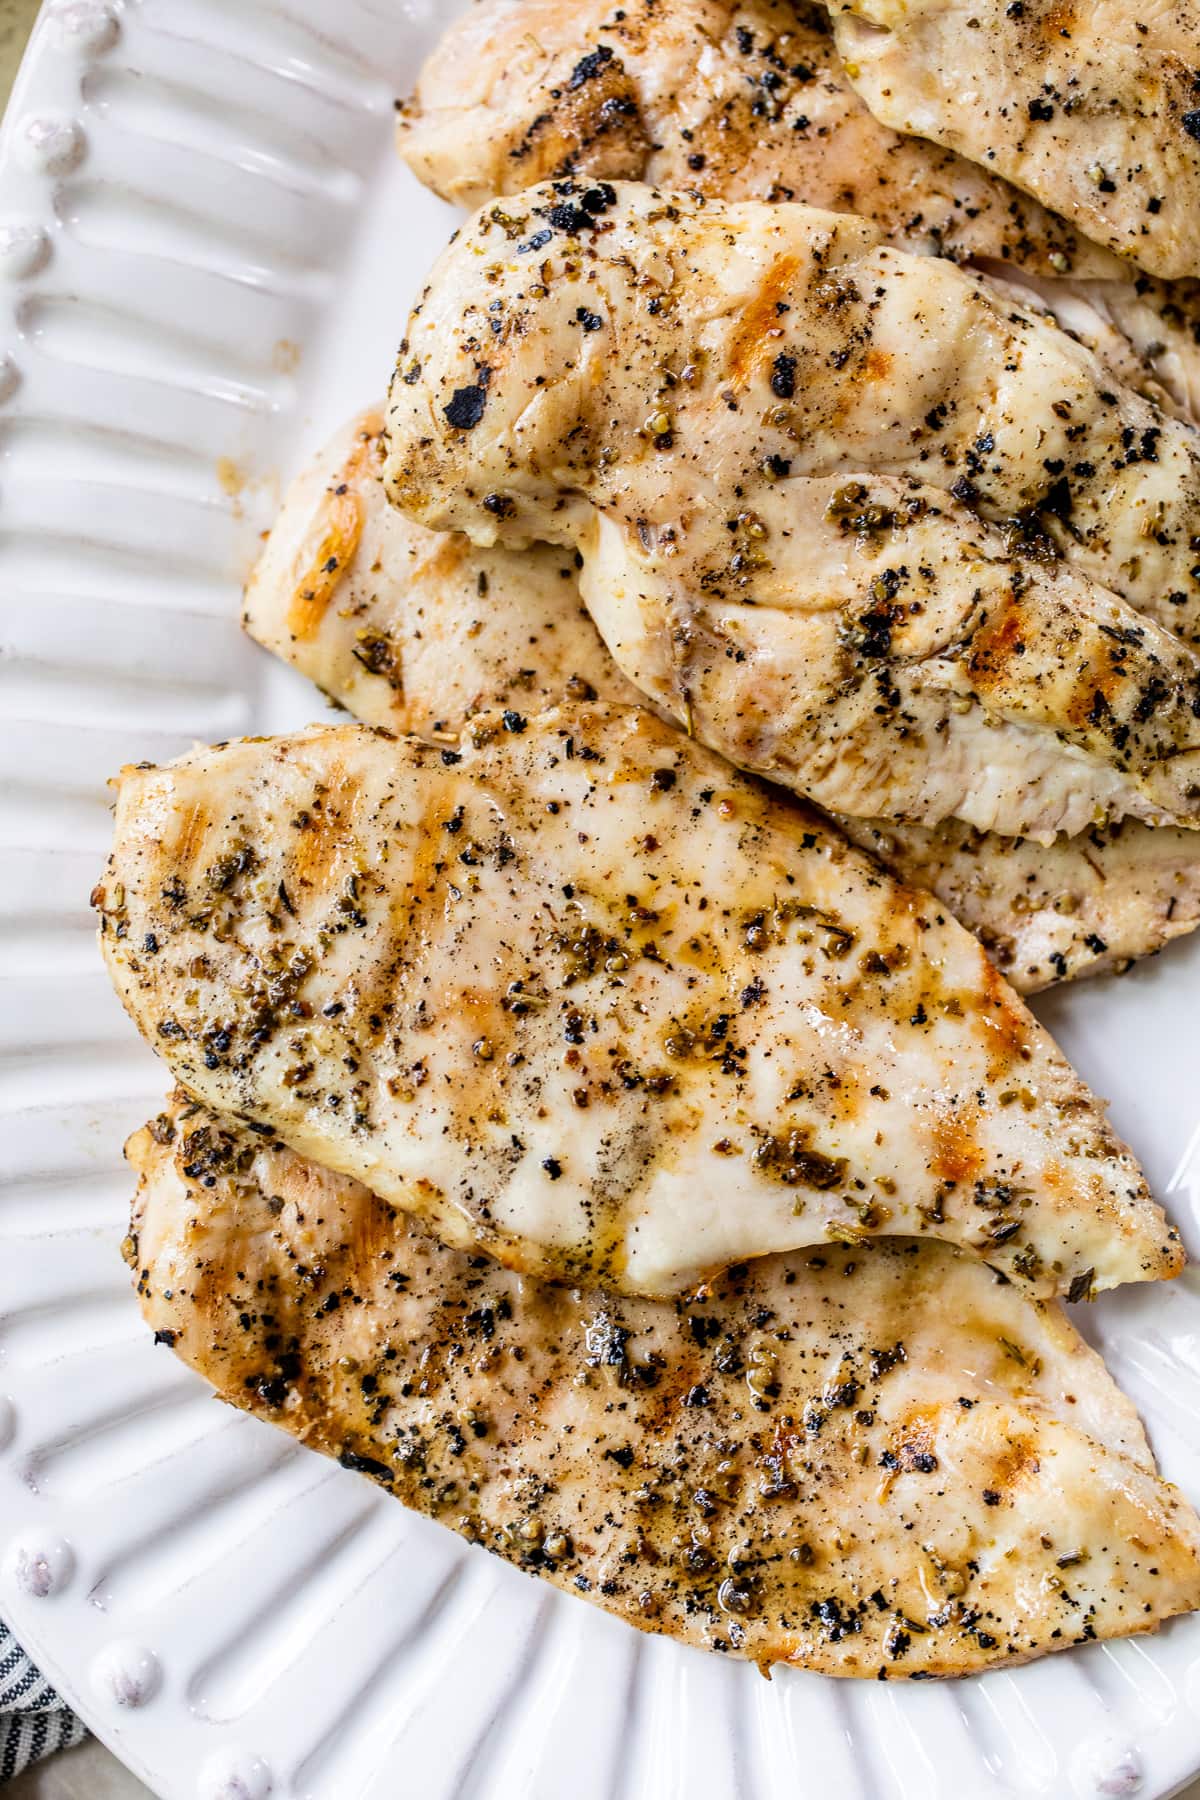 Grilled Chicken Breast 3 - How To Make Perfect Grilled Chicken Breast